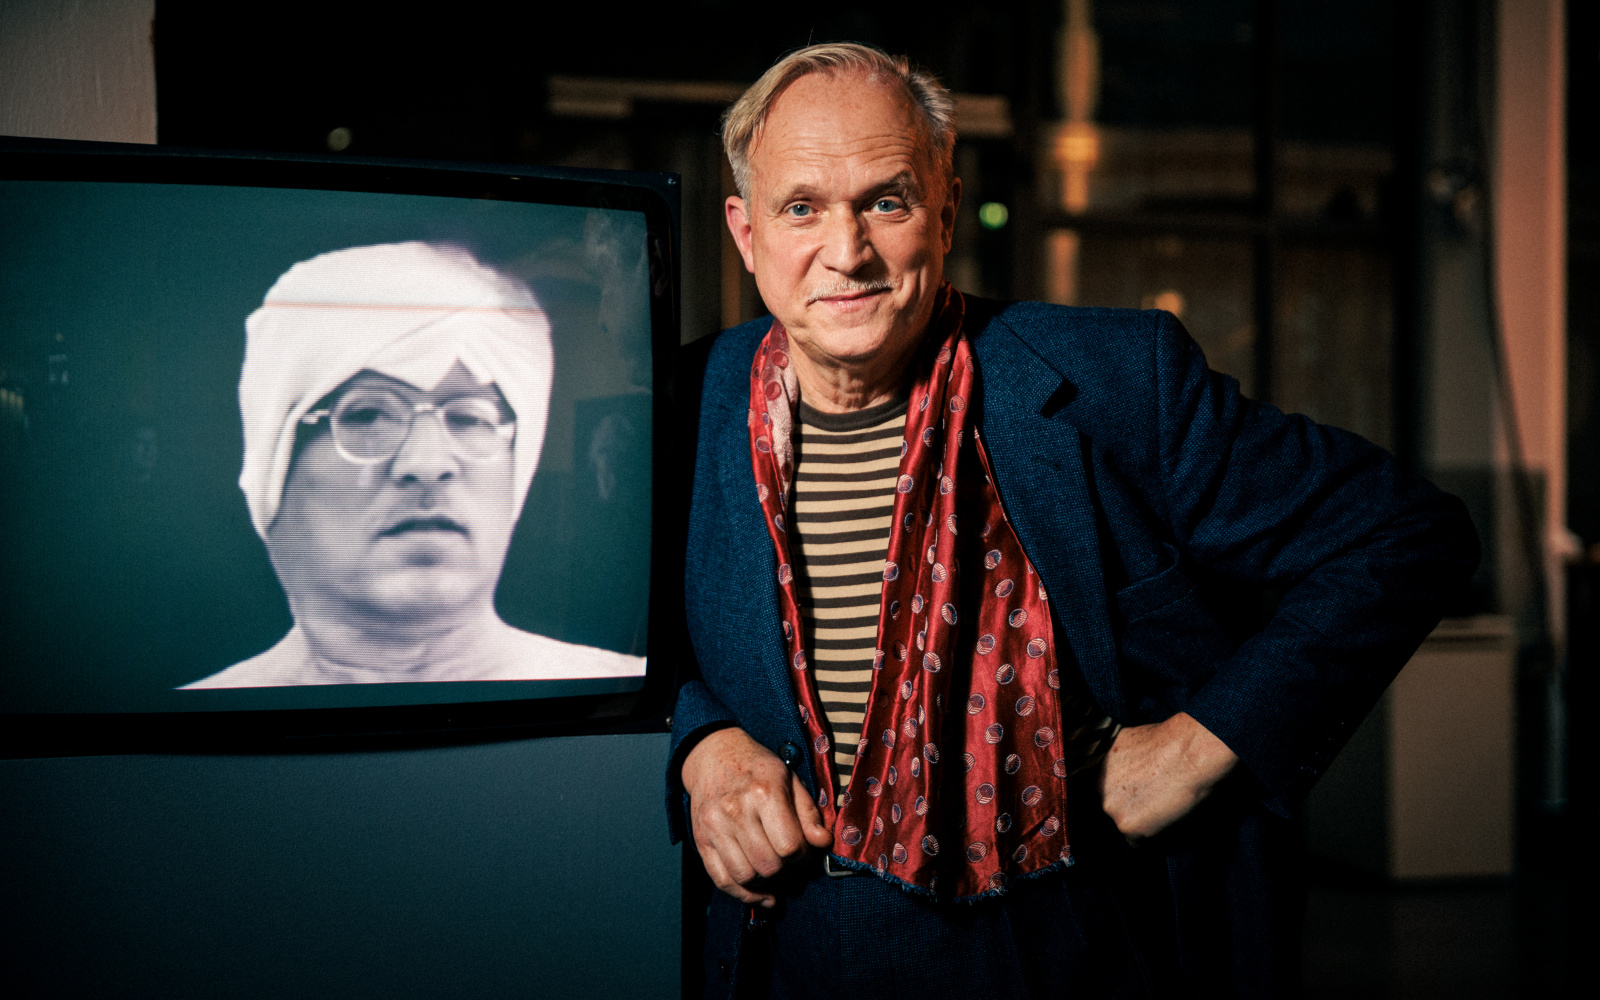 On view is a man standing next to a tube television in the exhibition "Katharina John: Talking Heads" at the ZKM | Karlsruhe, 2022.